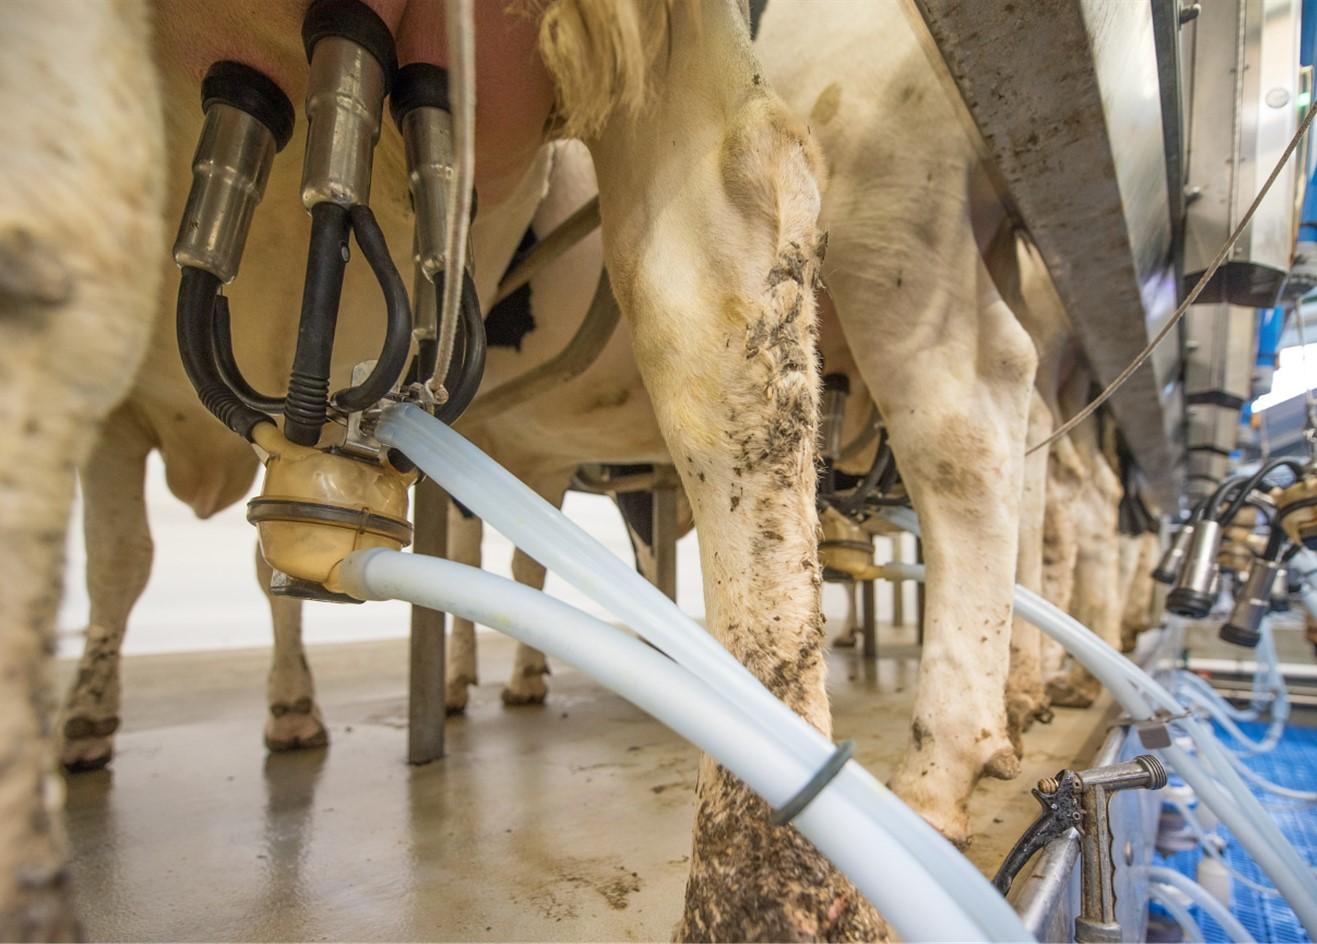 Cow hooked up to a milking machine